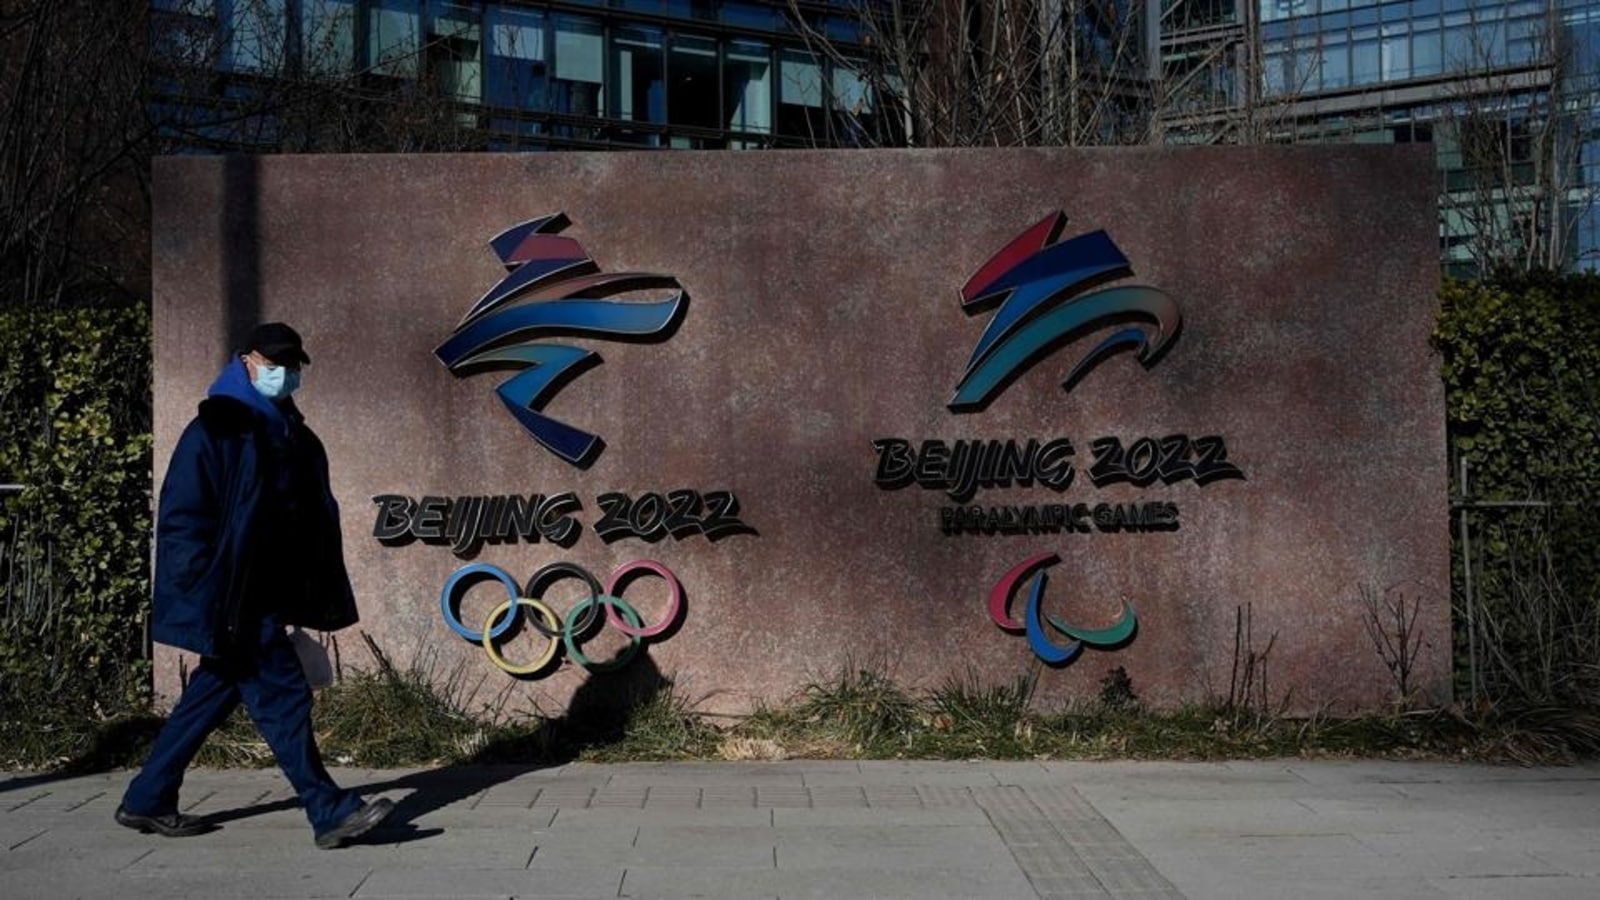 IOC says it ‘fully respects’ US move of diplomatic boycott of Beijing